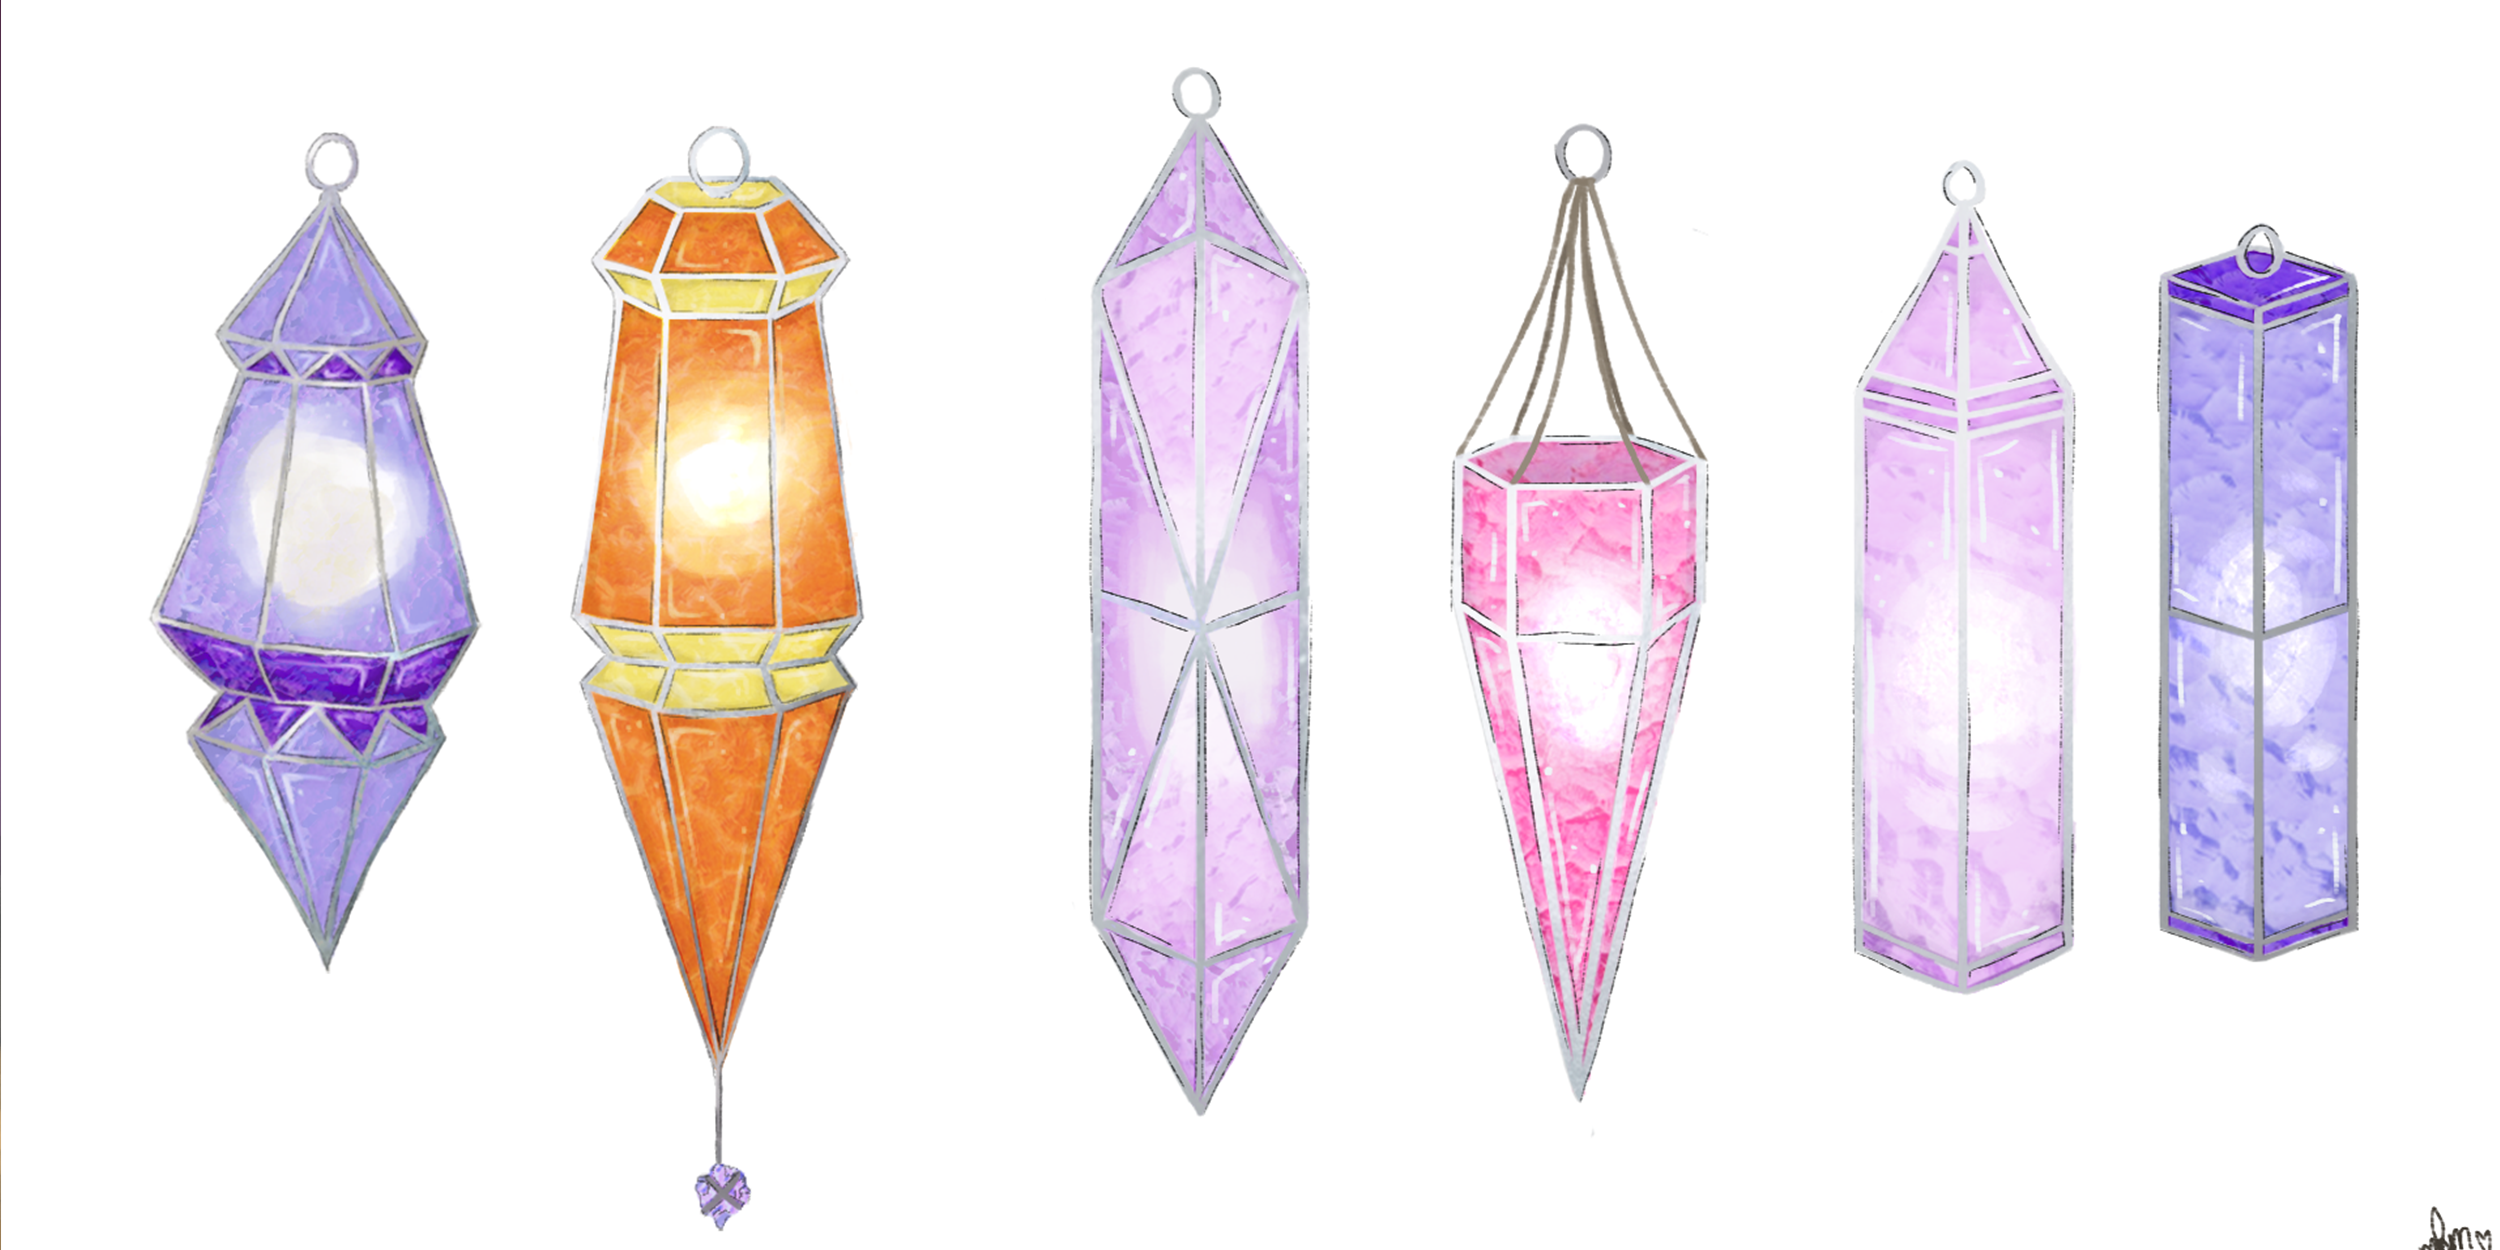 BA Games Art & Design work by Megan Frances Martin showing 5 lantern design inspired by stained glass windows